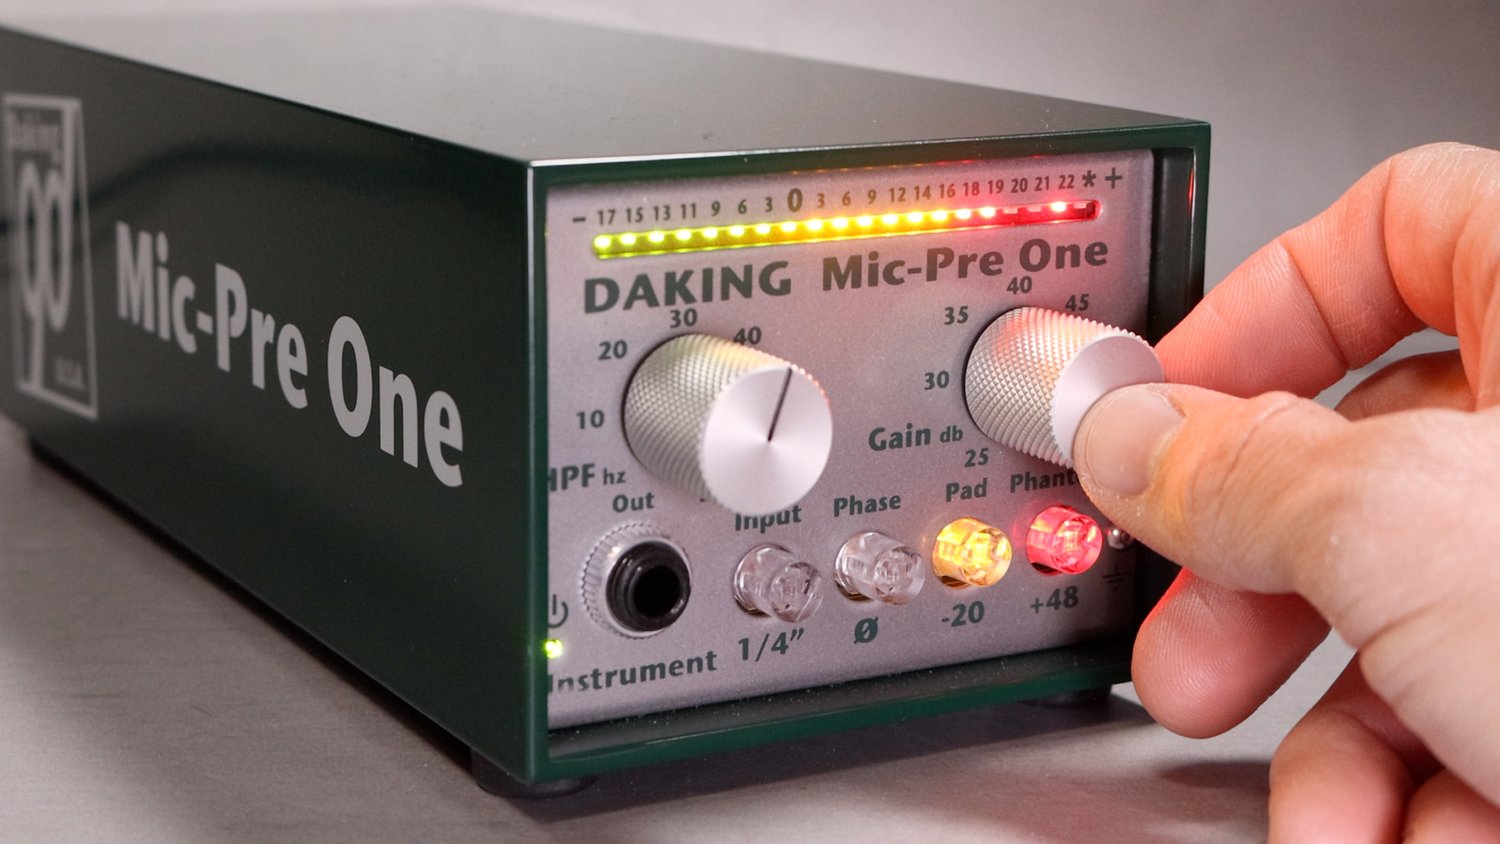 Daking Mic-Pre One Review / Test